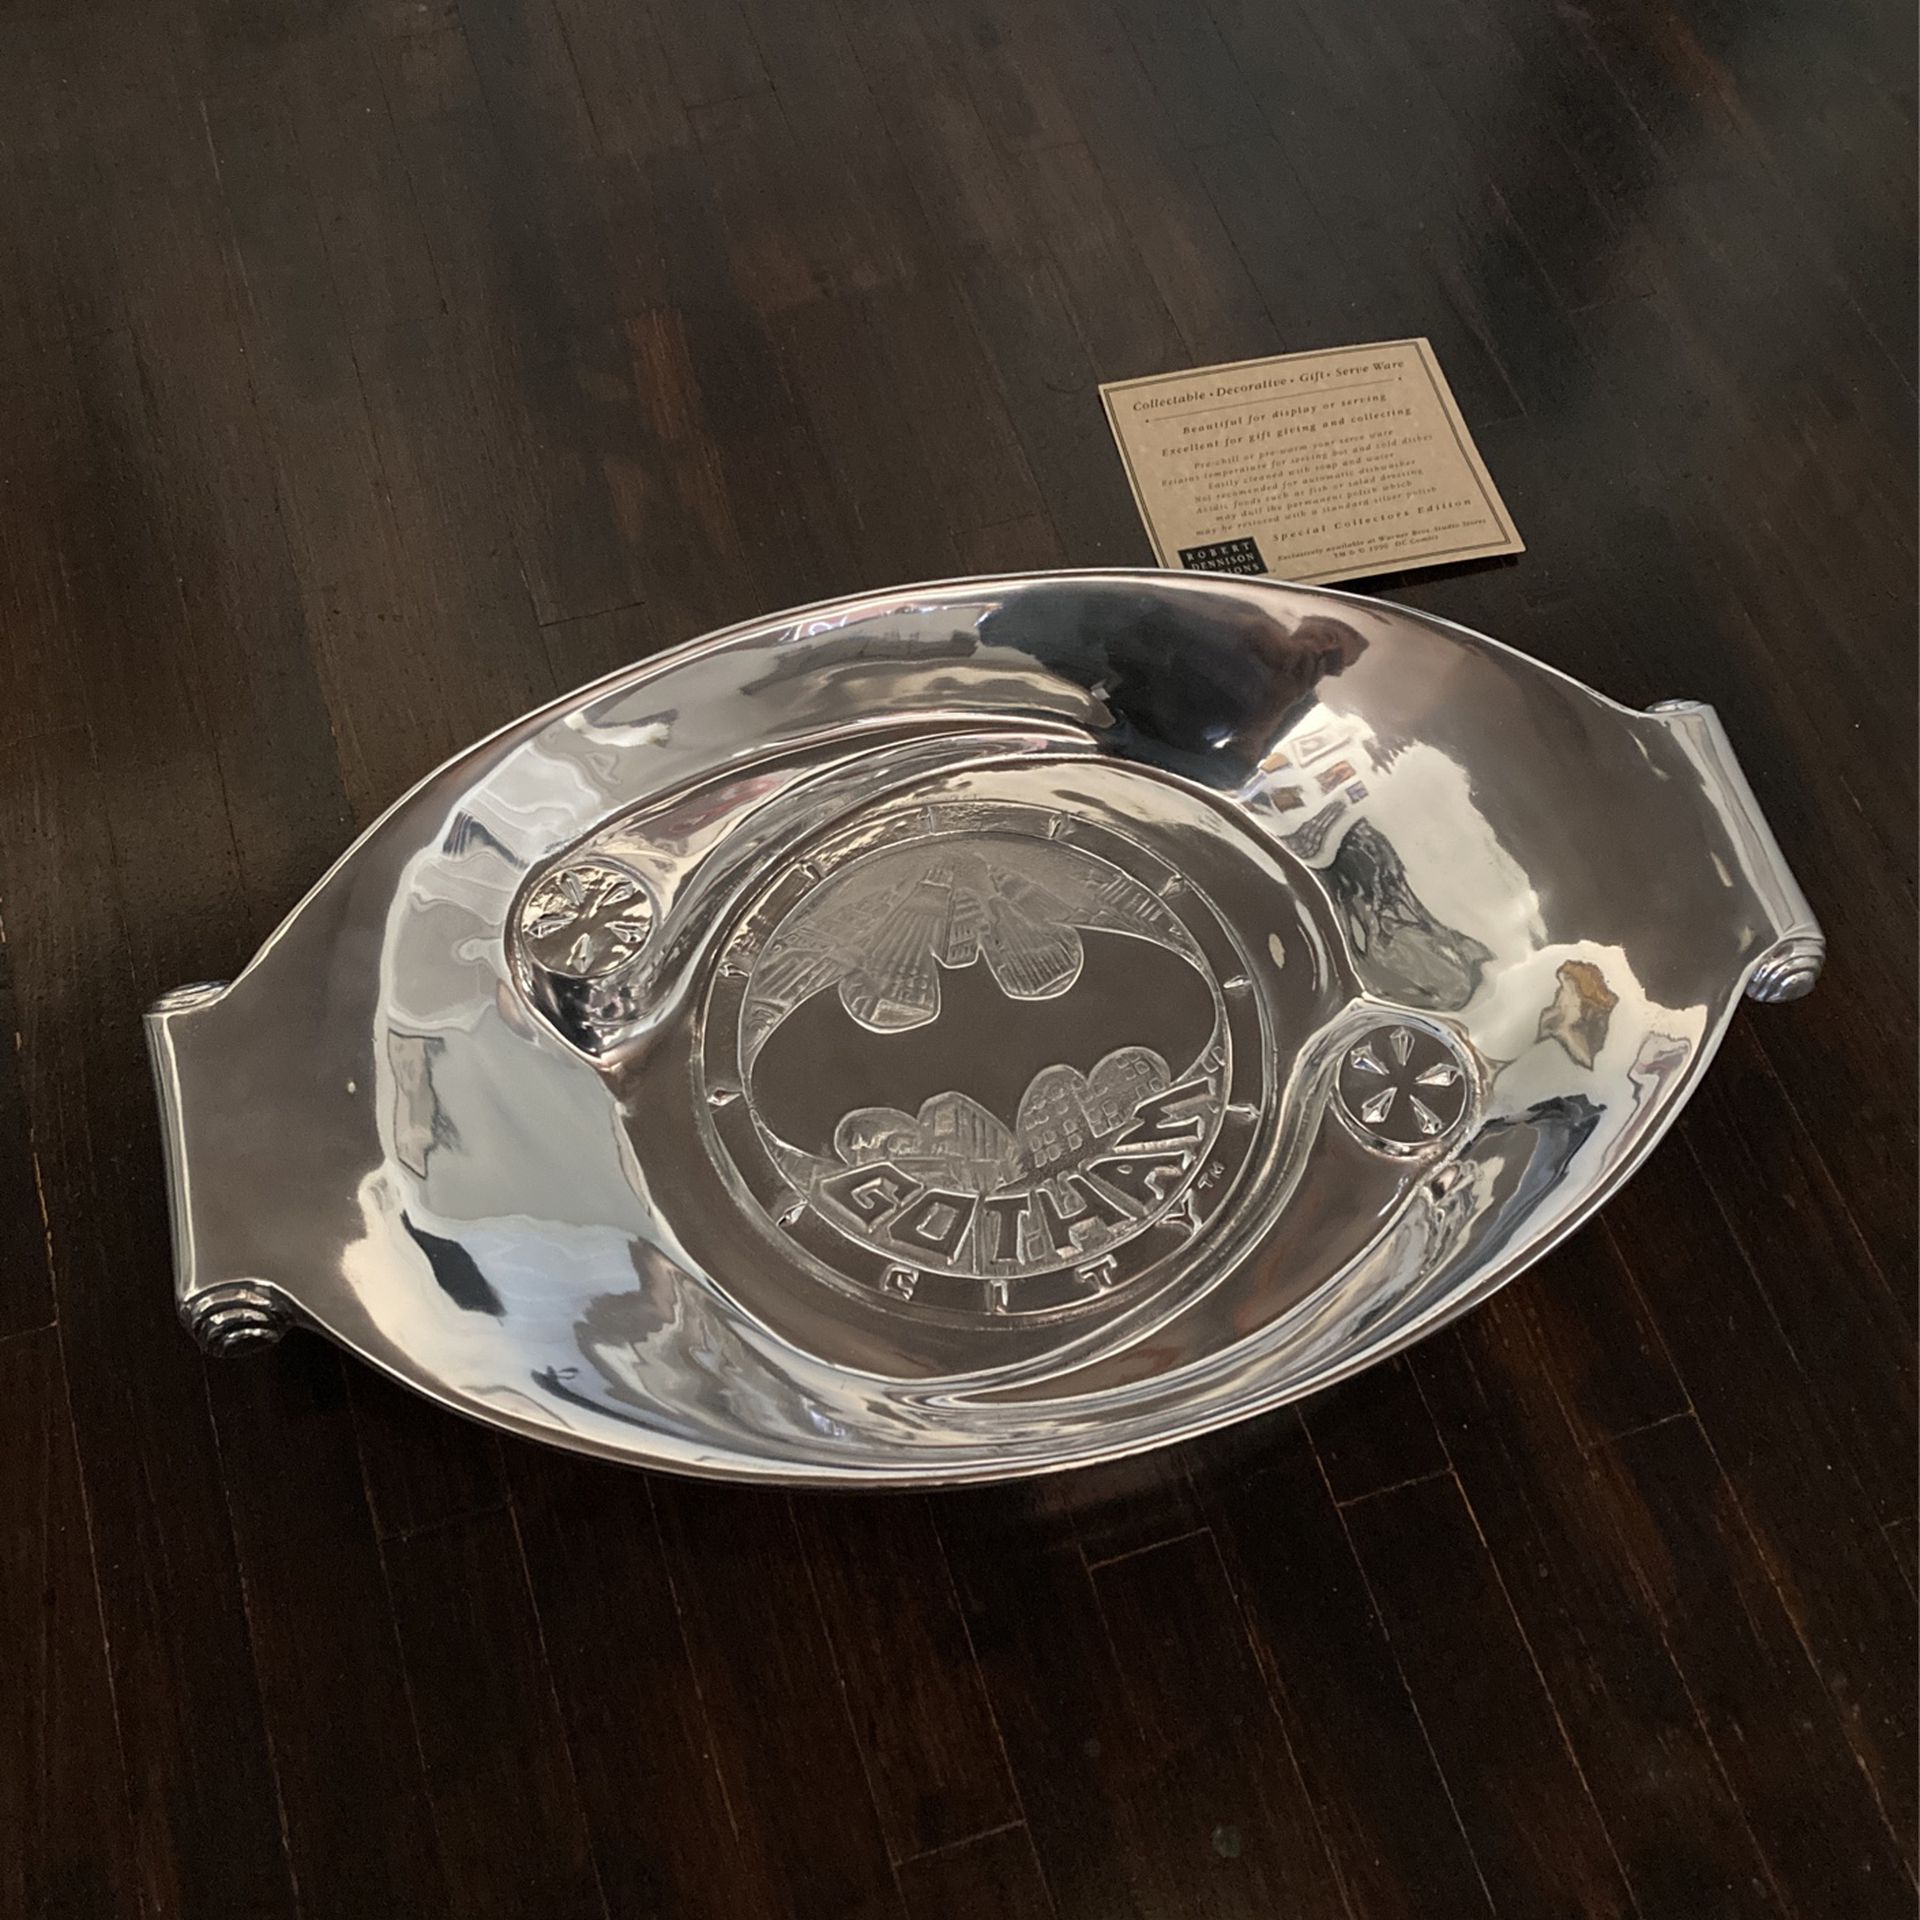 The great Gotham city coin collection Batman platter